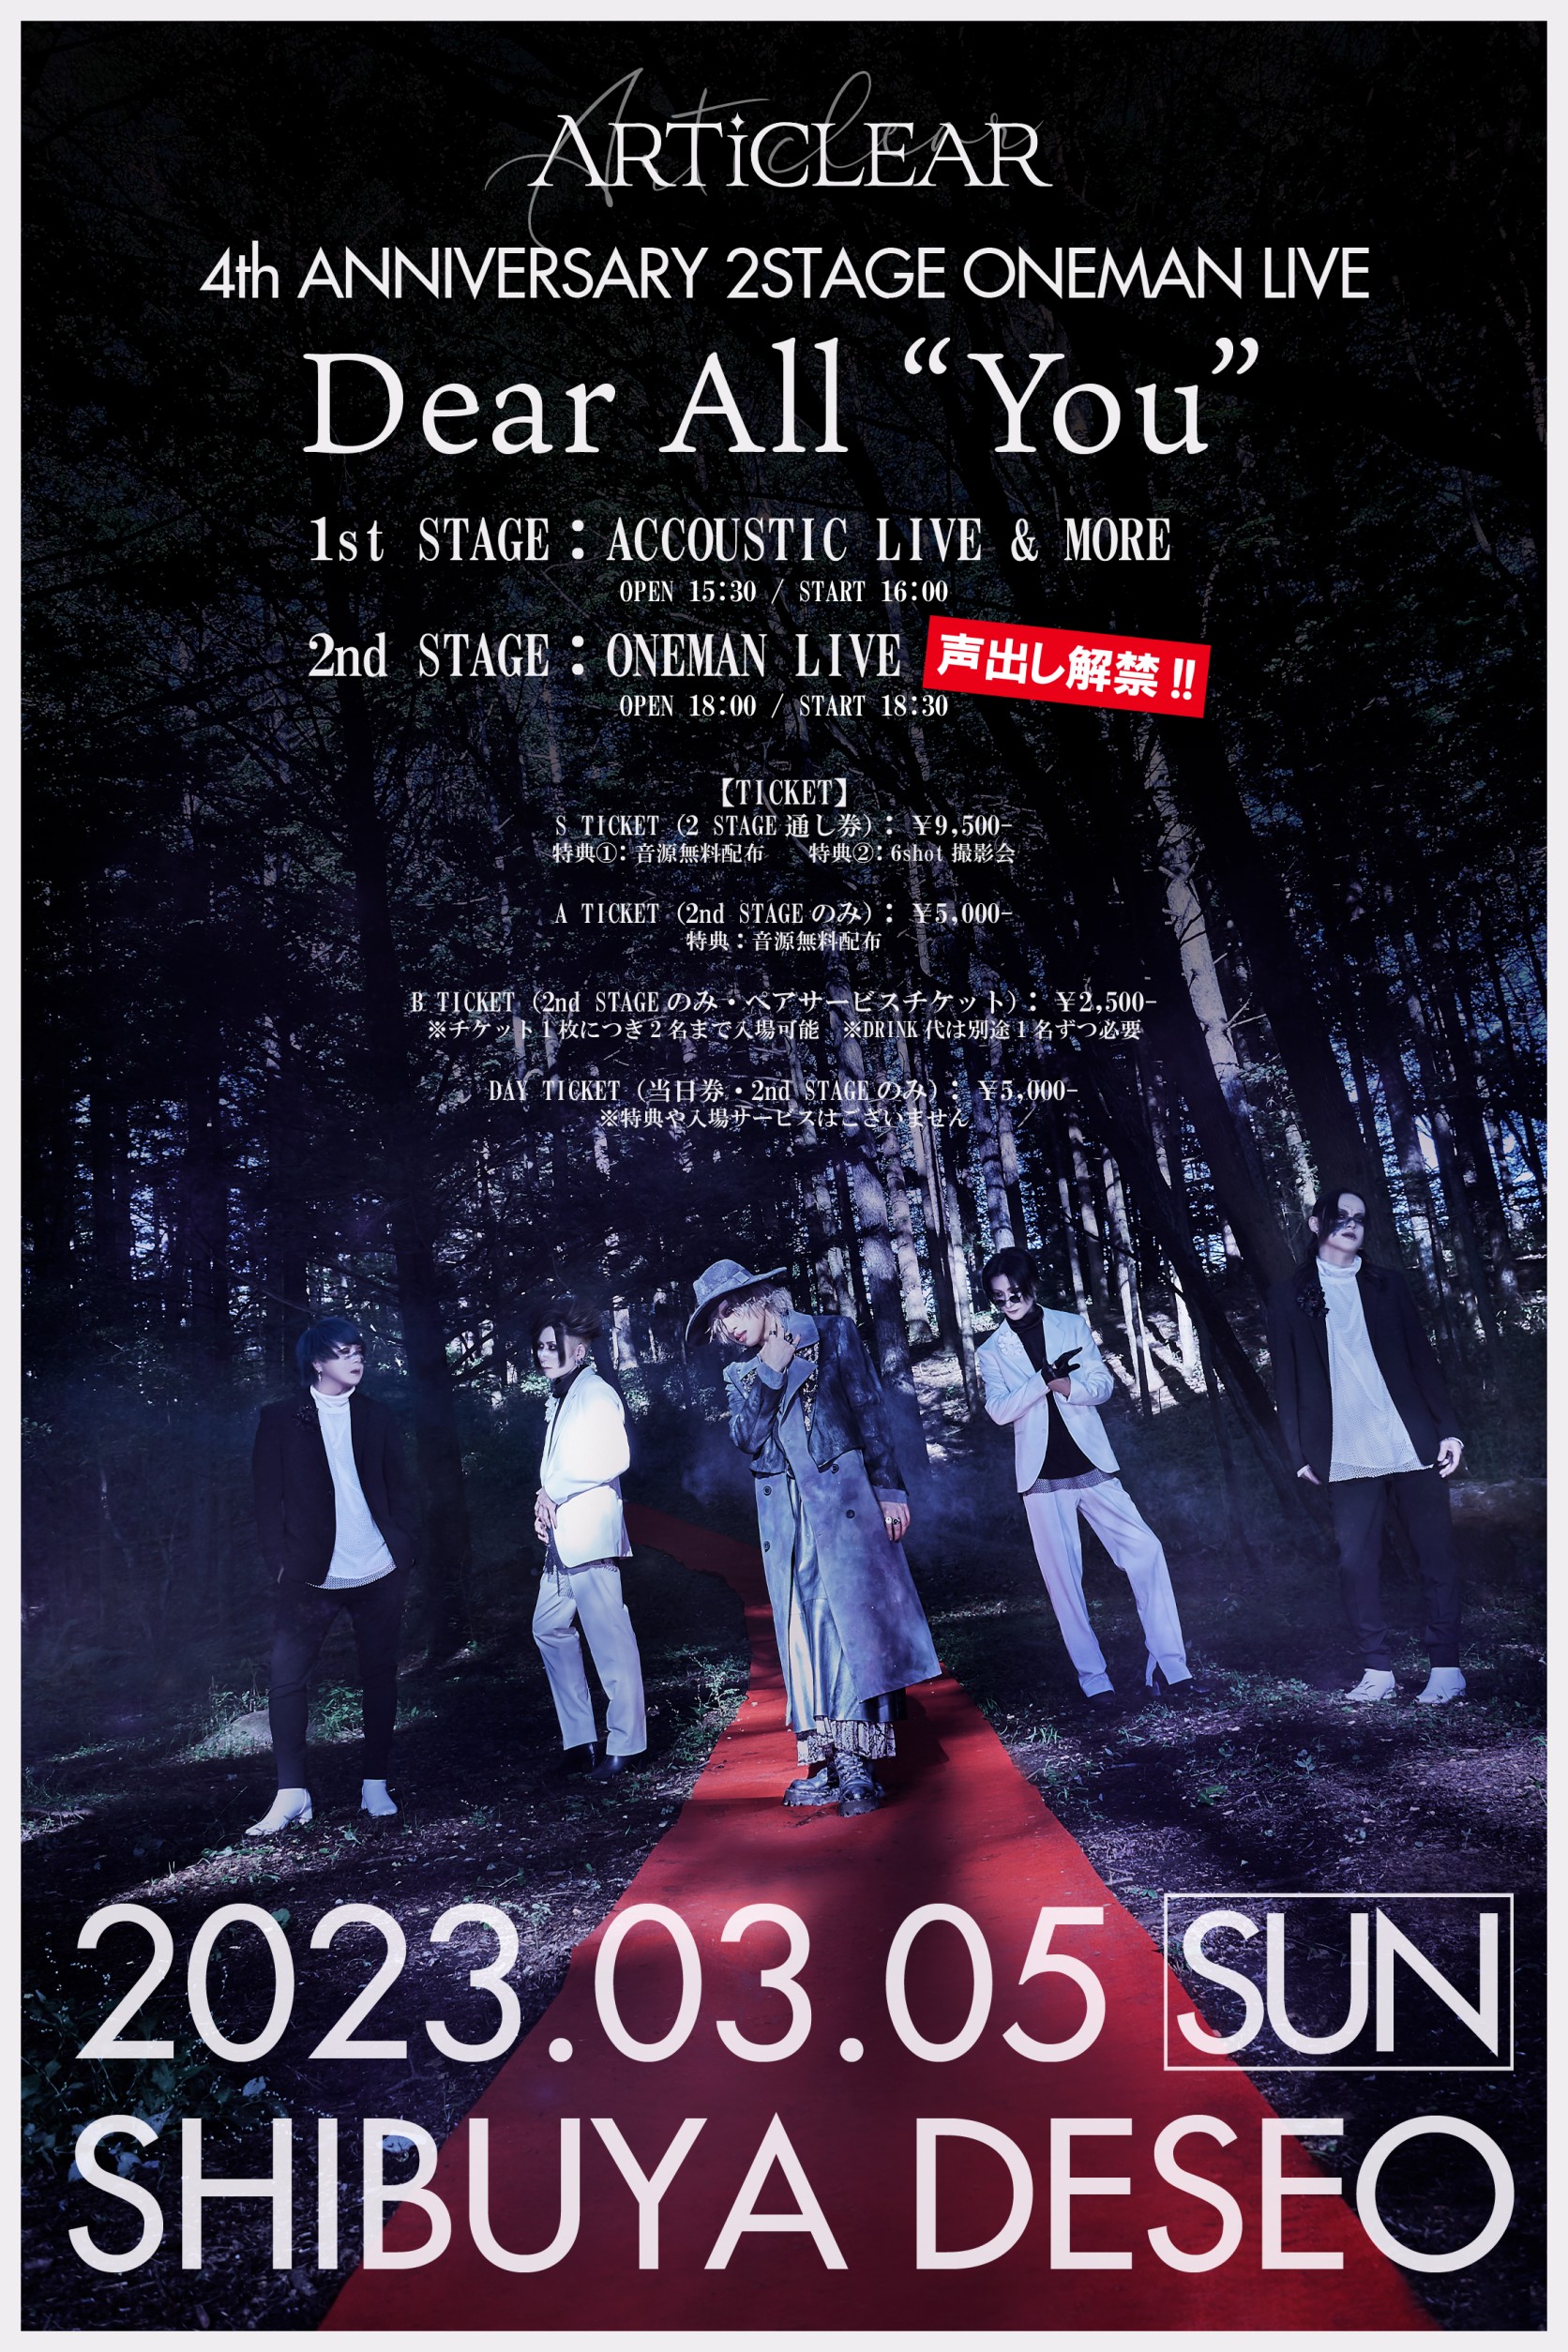 ARTiCLEAR 4th ANNIVERSARY 2STAGE ONEMAN LIVE Dear All “You”※ A TICKET（2nd STAGEのみ）